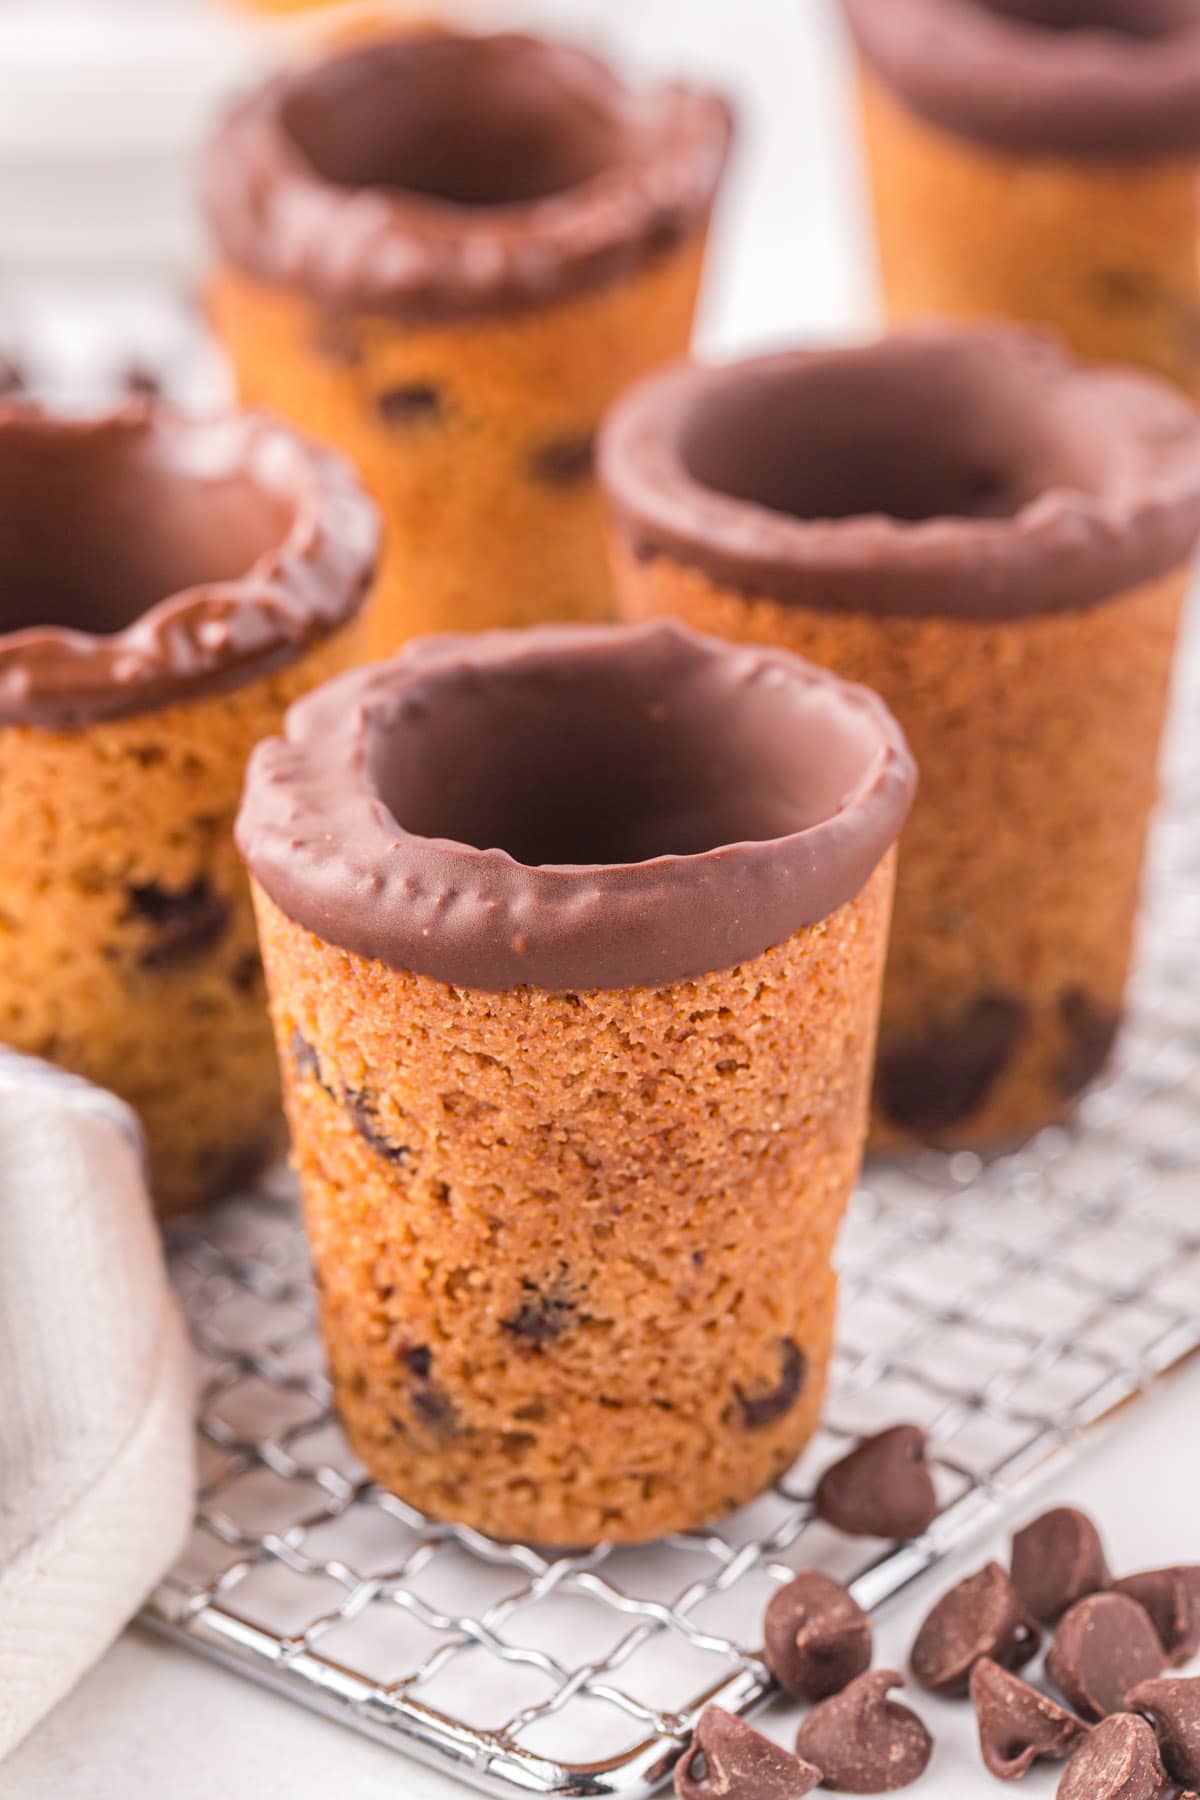 https://princesspinkygirl.com/wp-content/uploads/2021/11/Chocolate-Chip-Cookie-Shooters-13.jpg